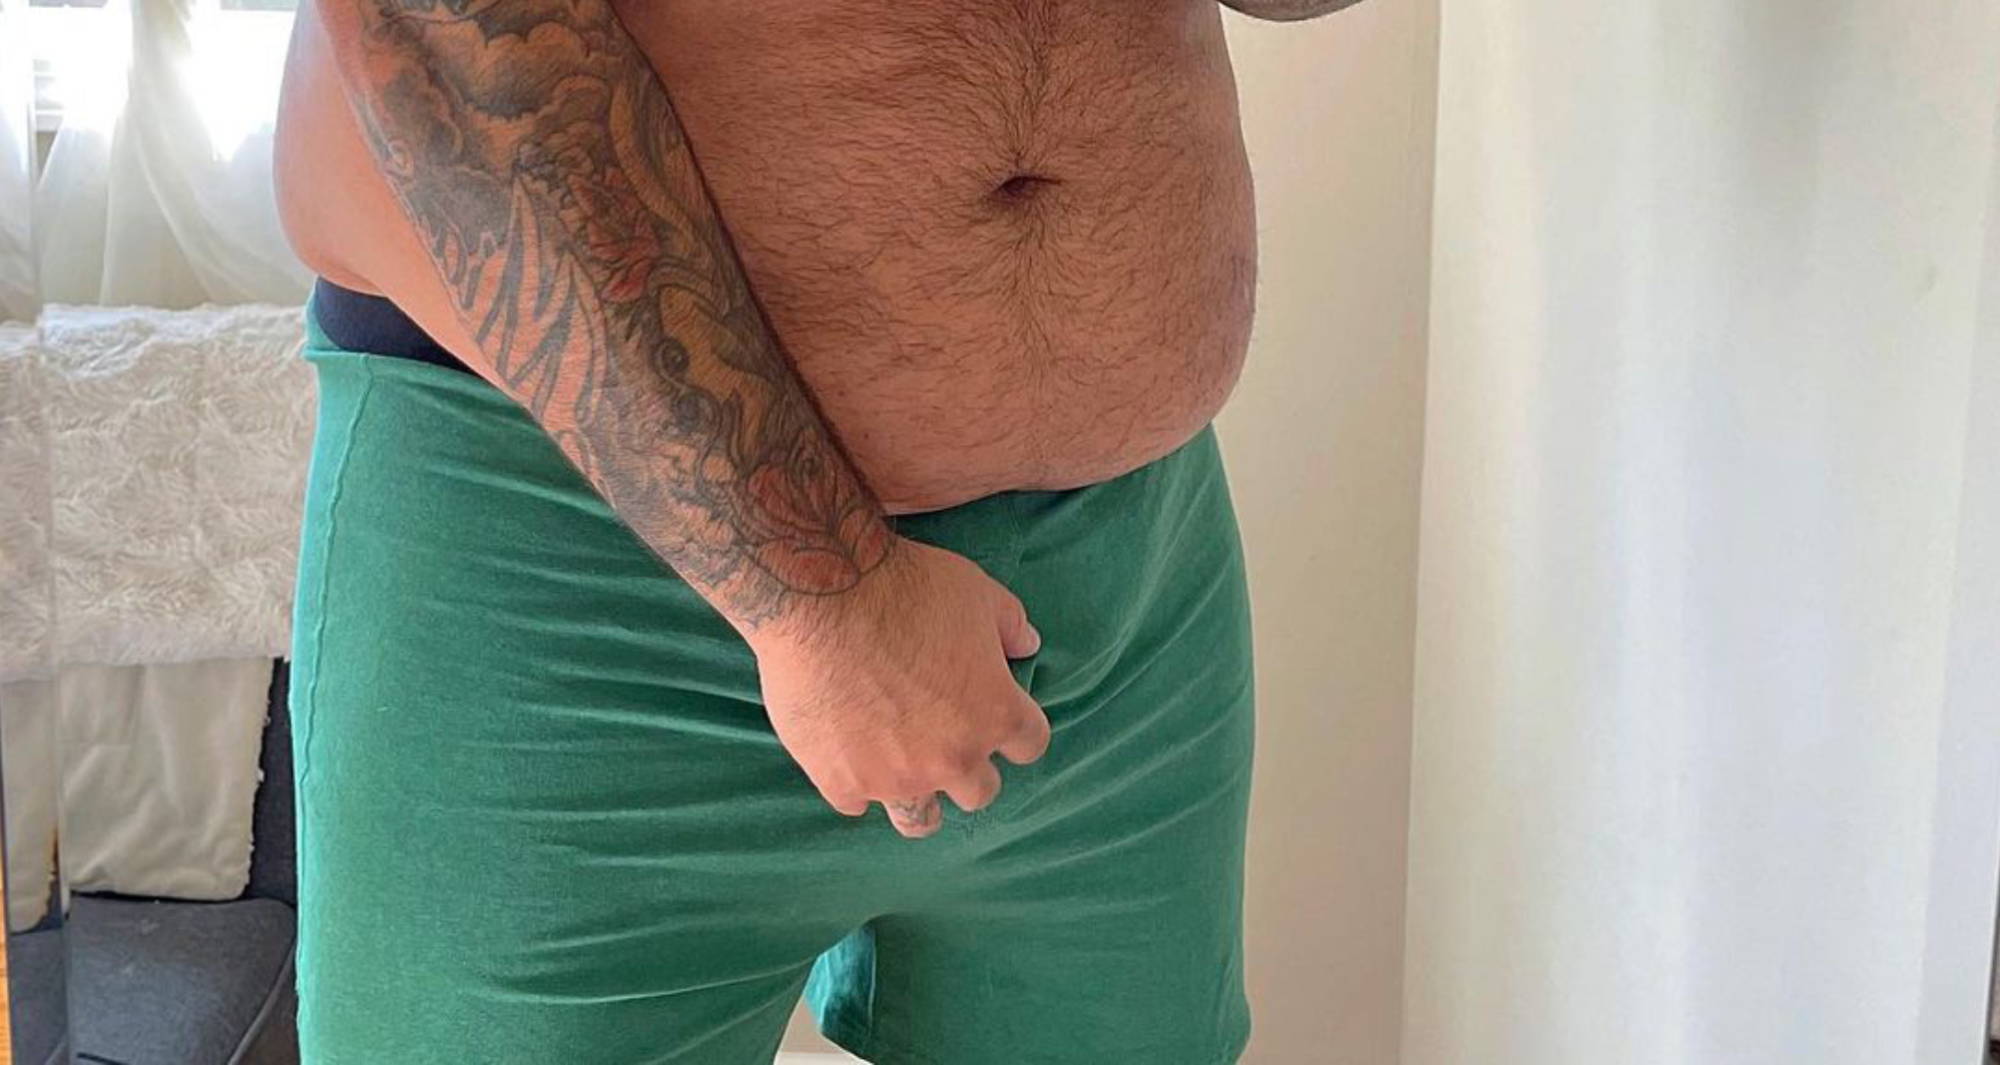  a plus-size man in green boxers with his hand in front of his package